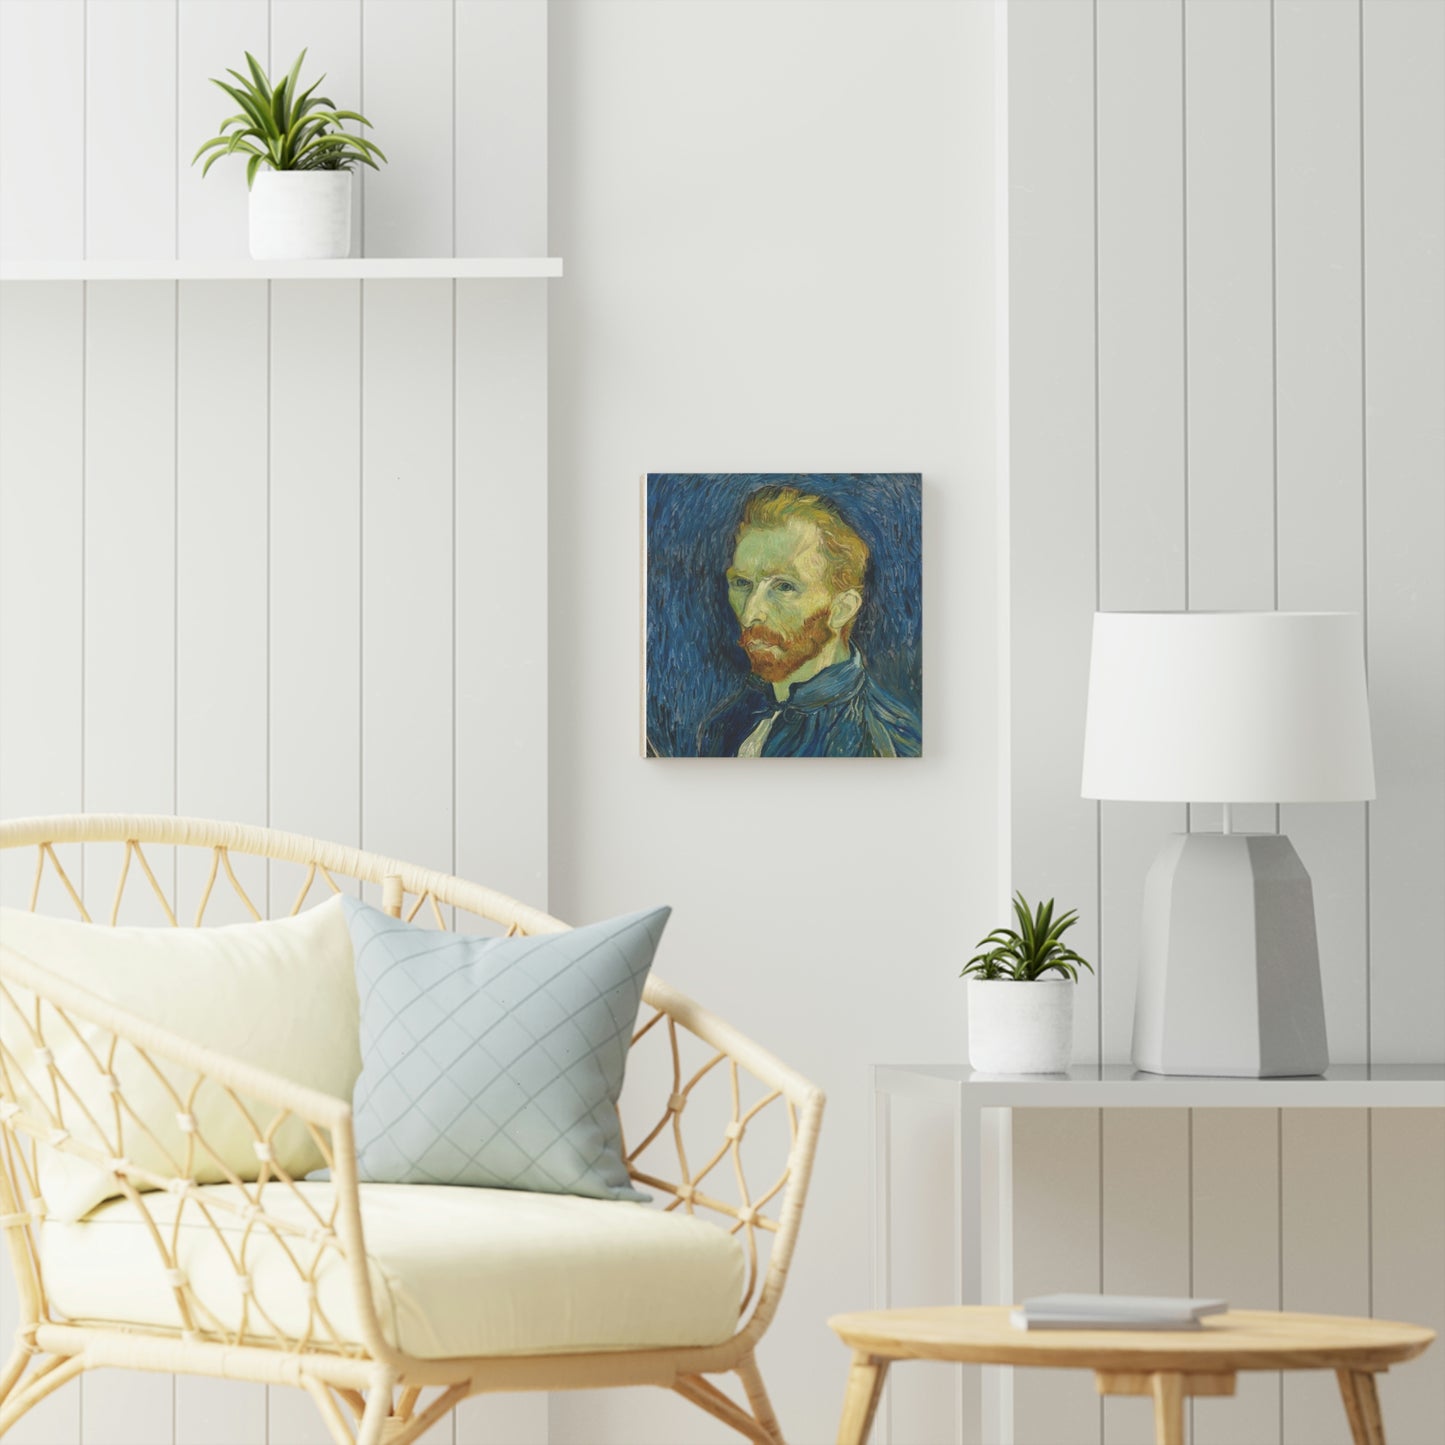 Art Rustic Charm: Personalize Your Home Decor with Wood Canvas Prints